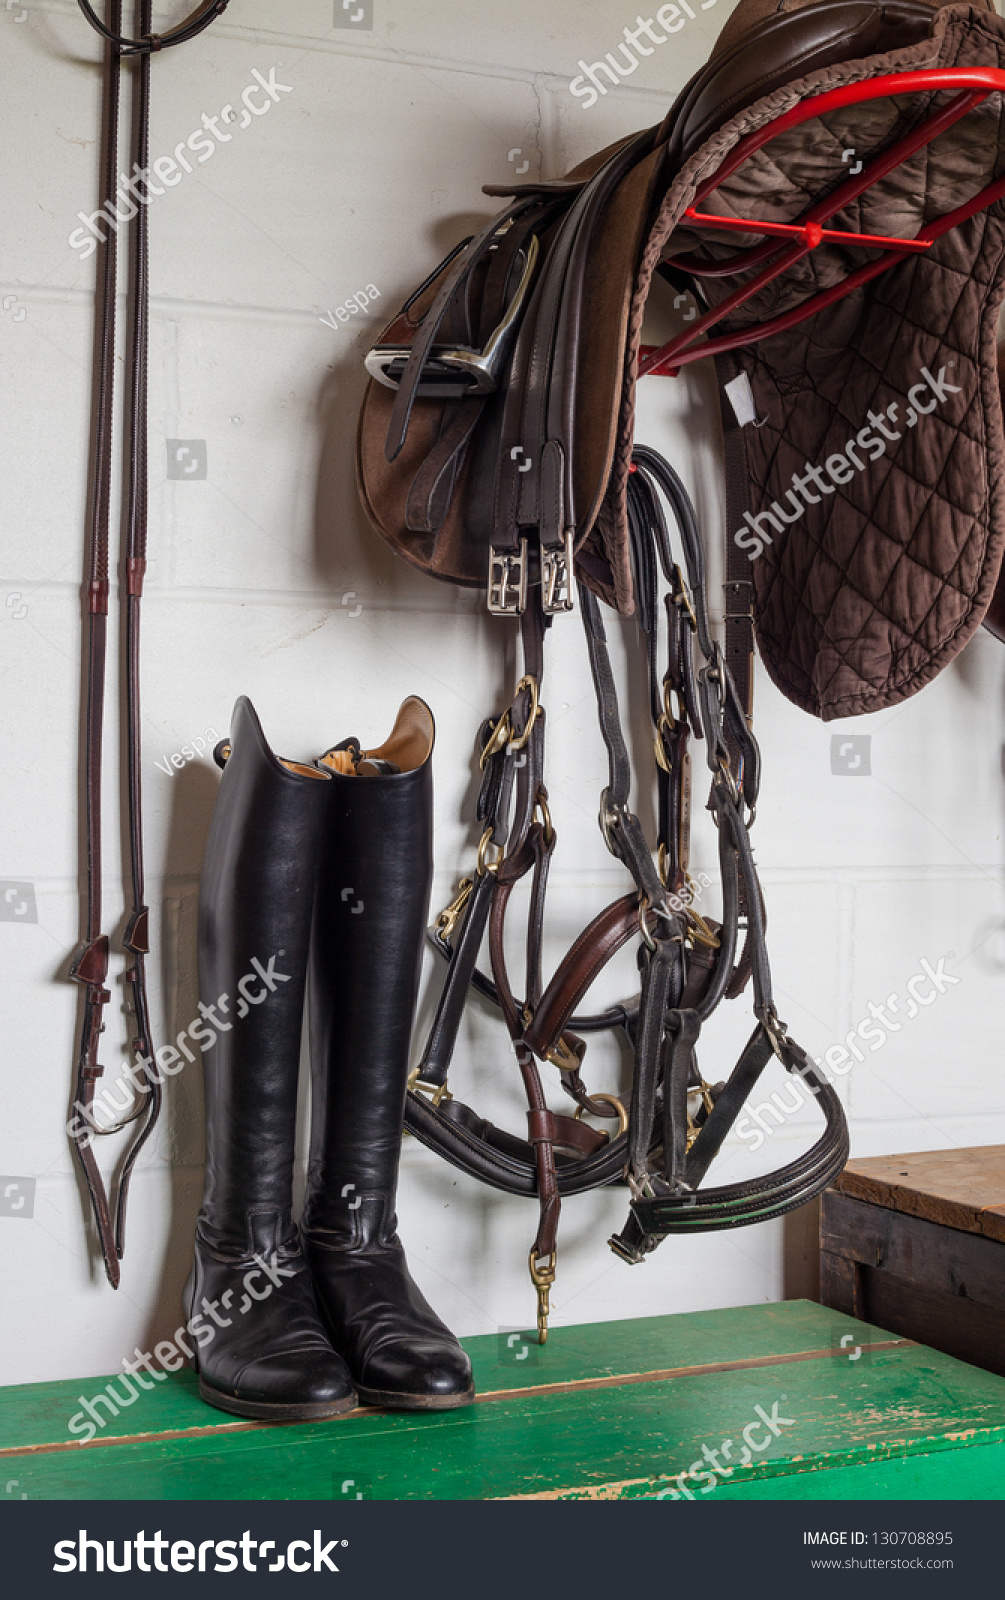 Tack Room Stock Image Download Now